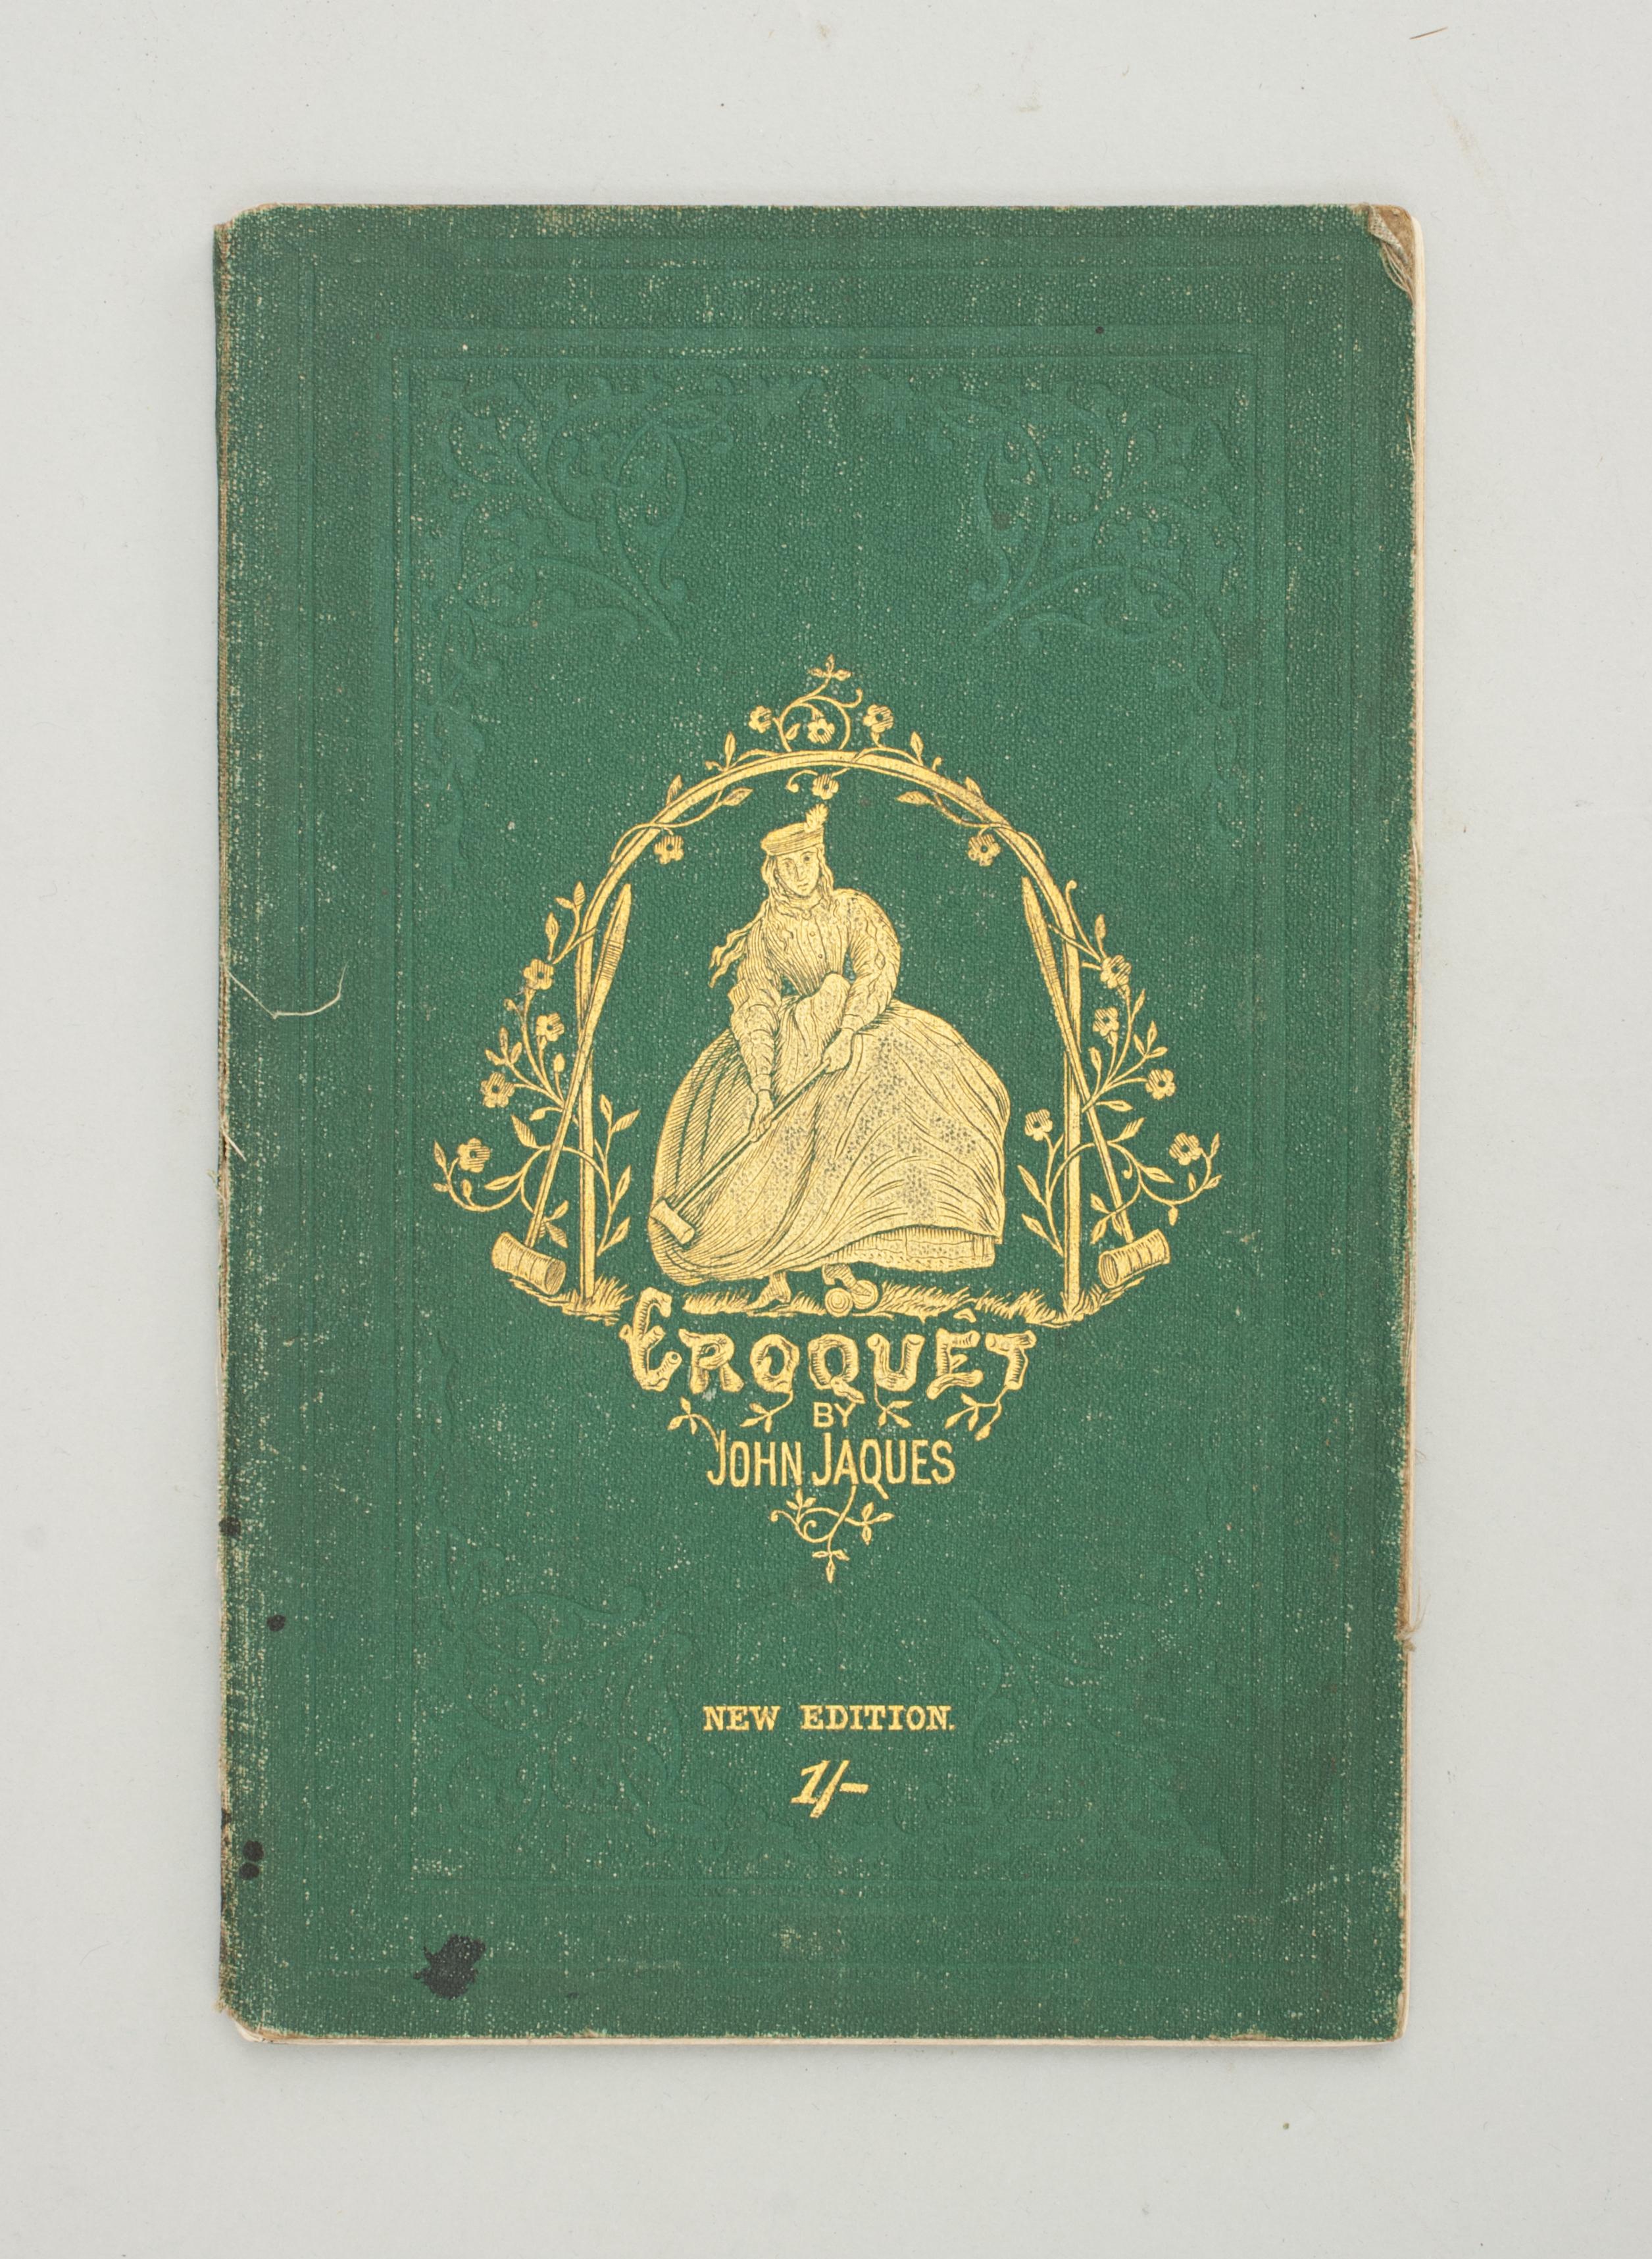 Antique Croquet Rule book by John Jacques.
A rare early Croquet 'Laws and Regulations' book by John Jaques. Published in 1865 with illustrated diagrams and engravings. This is the second publication undertaken for the ensuing season with